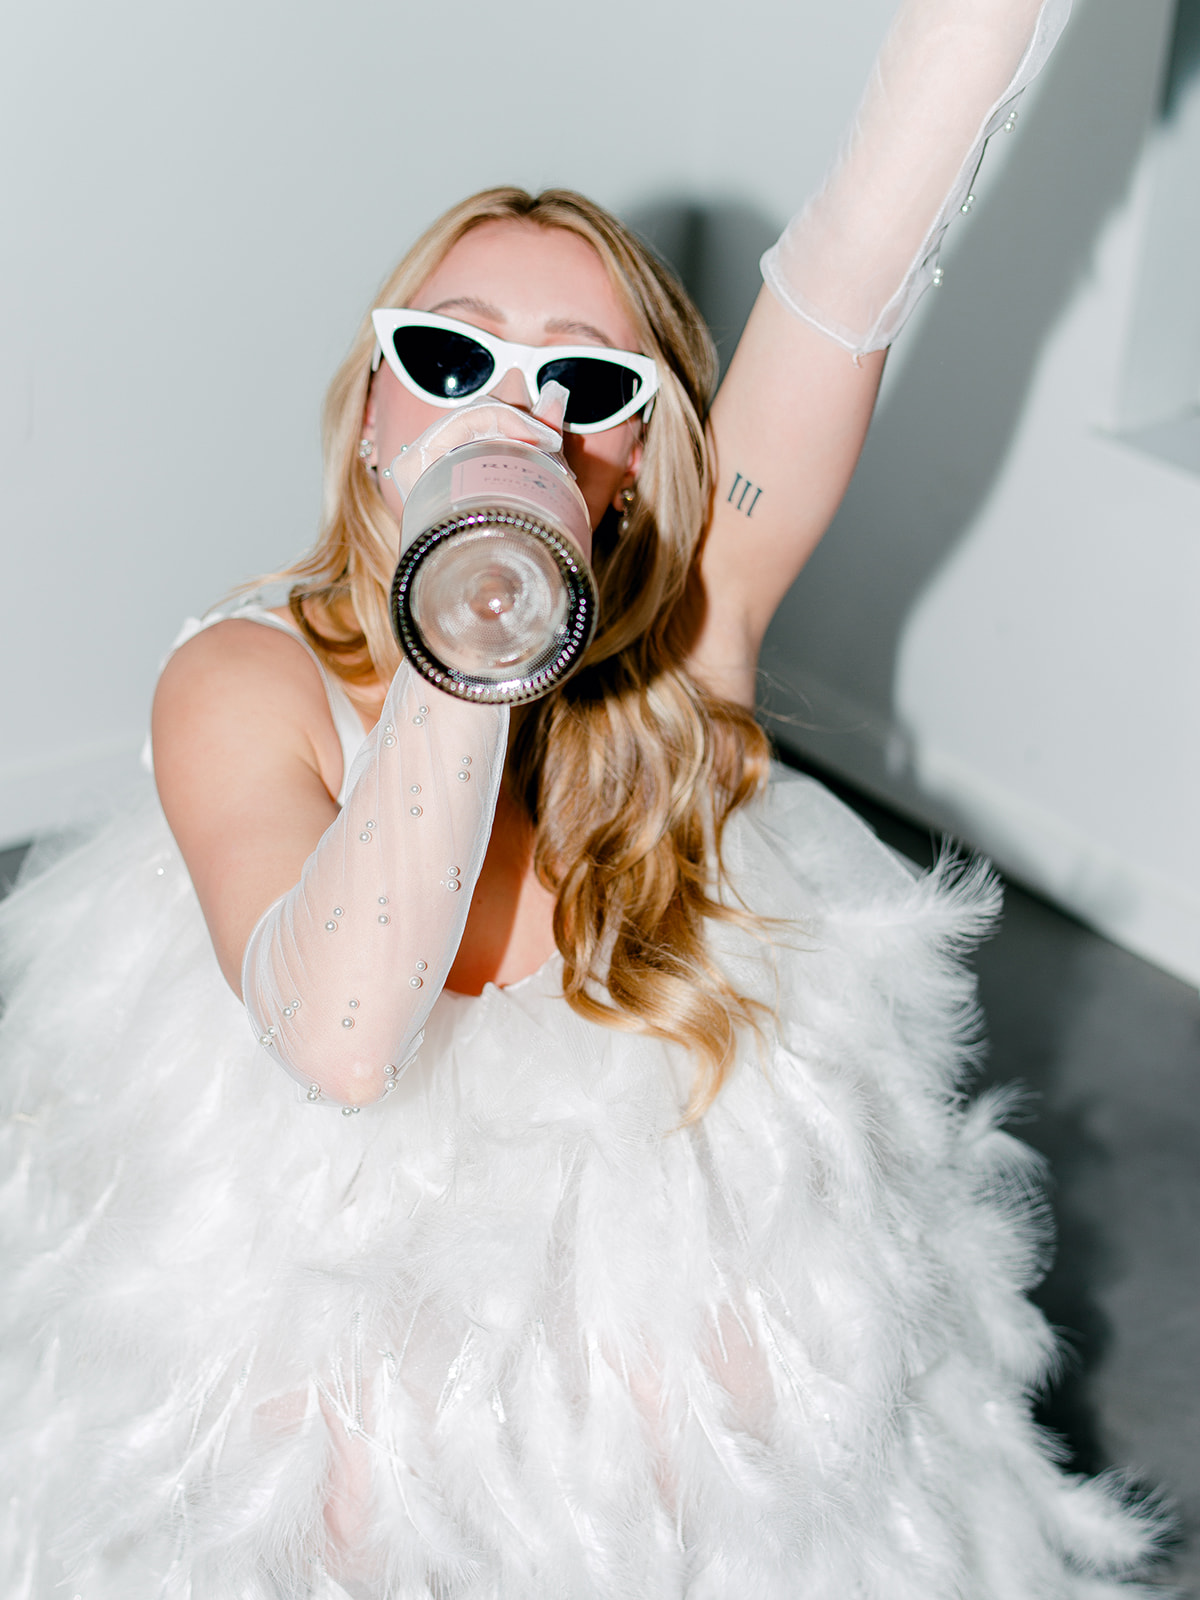 Modern and playful bride drinking champagne from the bottle in bridal portraits, sheer tulle bridal gloves with pearl details and white retro sunglasses worn by chic bride in flash photoshoot